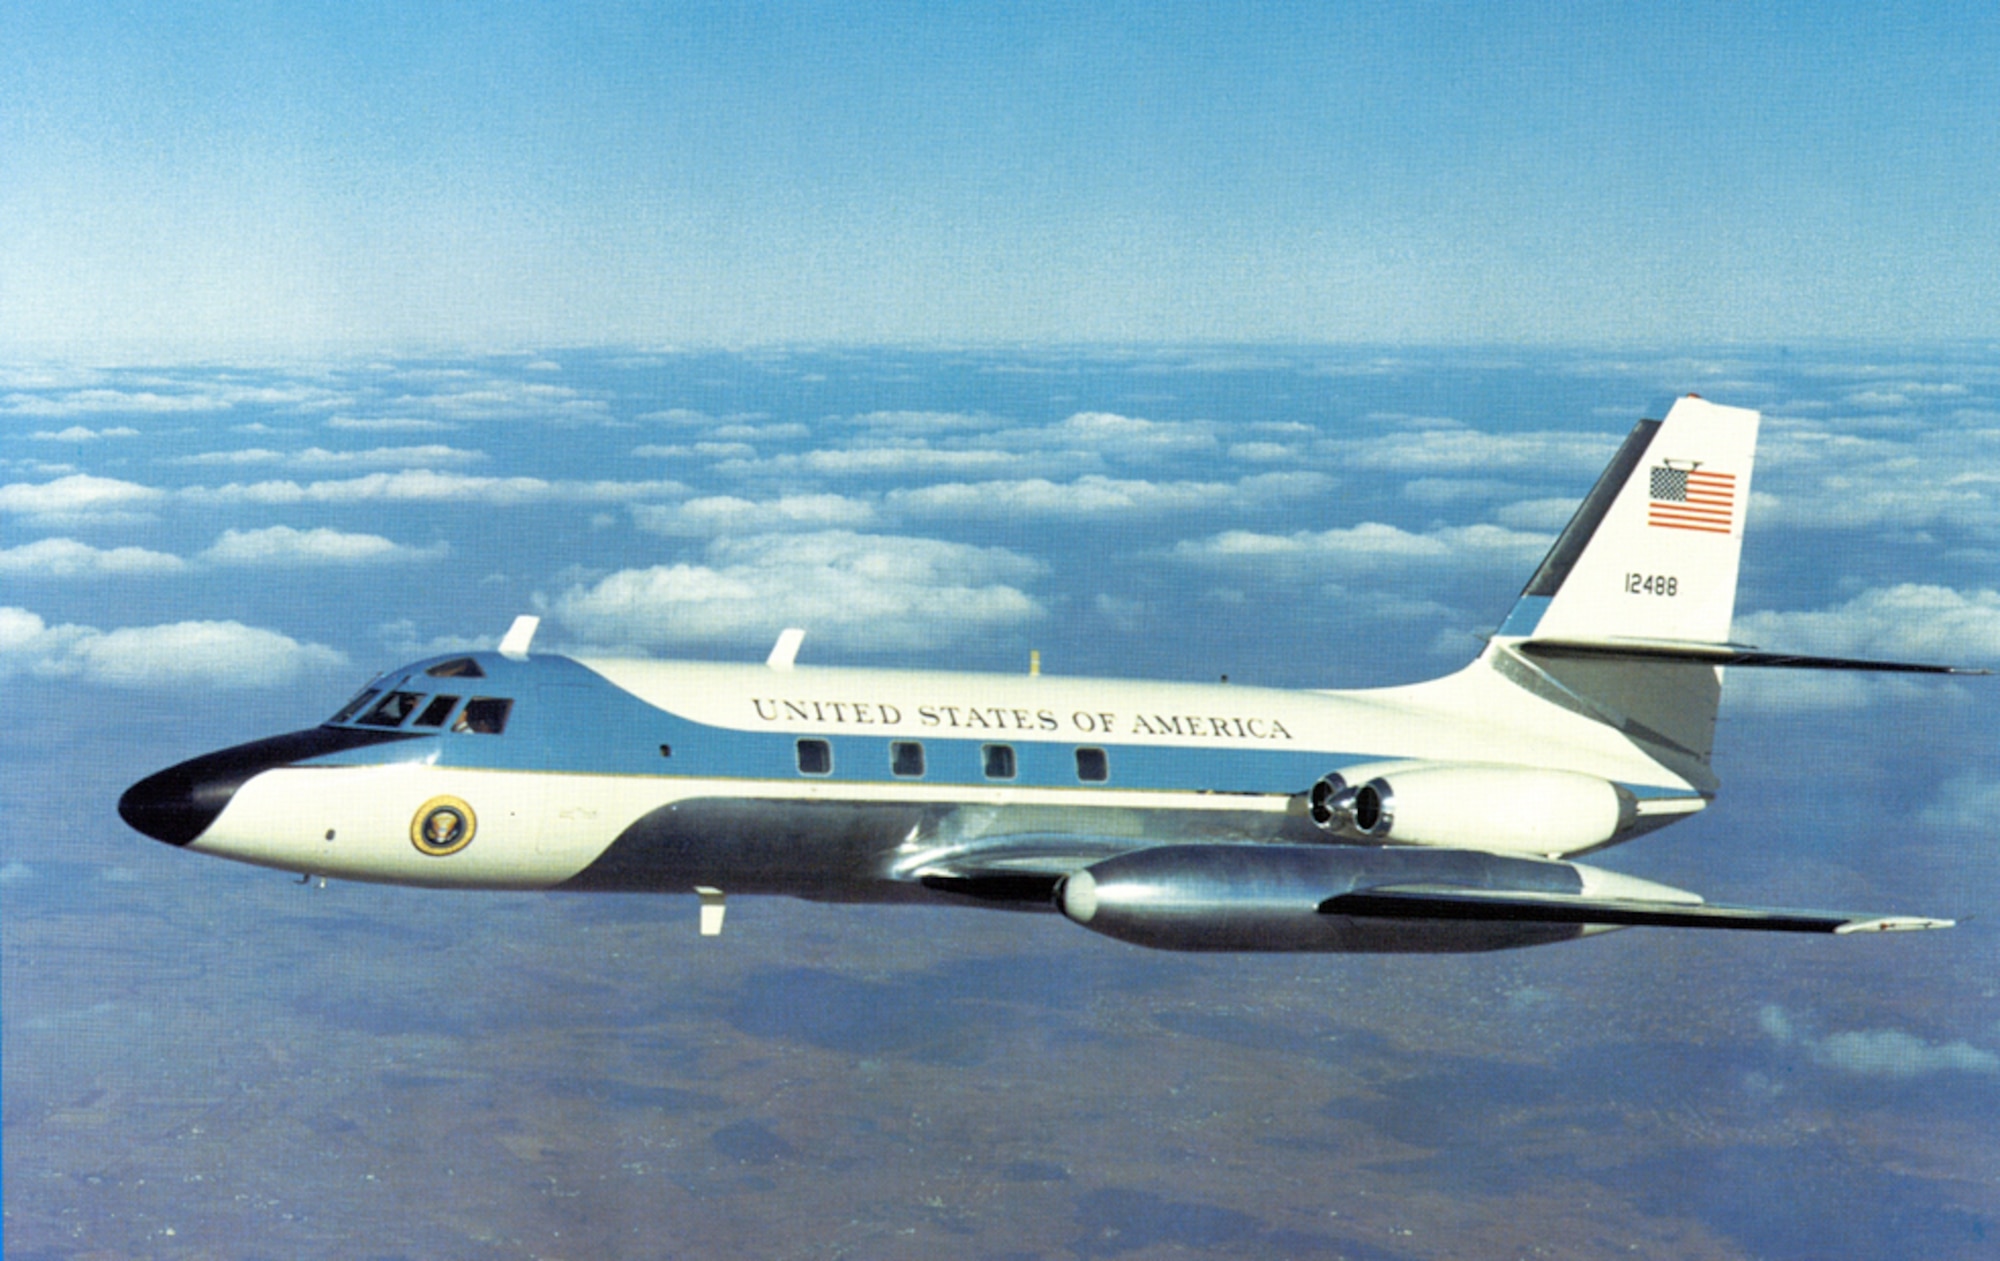 C-140 Jet Star, 1987-1990: The 1866th Facility Checking Squadron came to Scott AFB to perform flight inspections world-wide for DoD navigational aids/radar facilities on non-assigned Federal Aviation Administration C-140 Jet Star on Scott AFB controllers. The unit brought with it four C-140A Jet Stars.